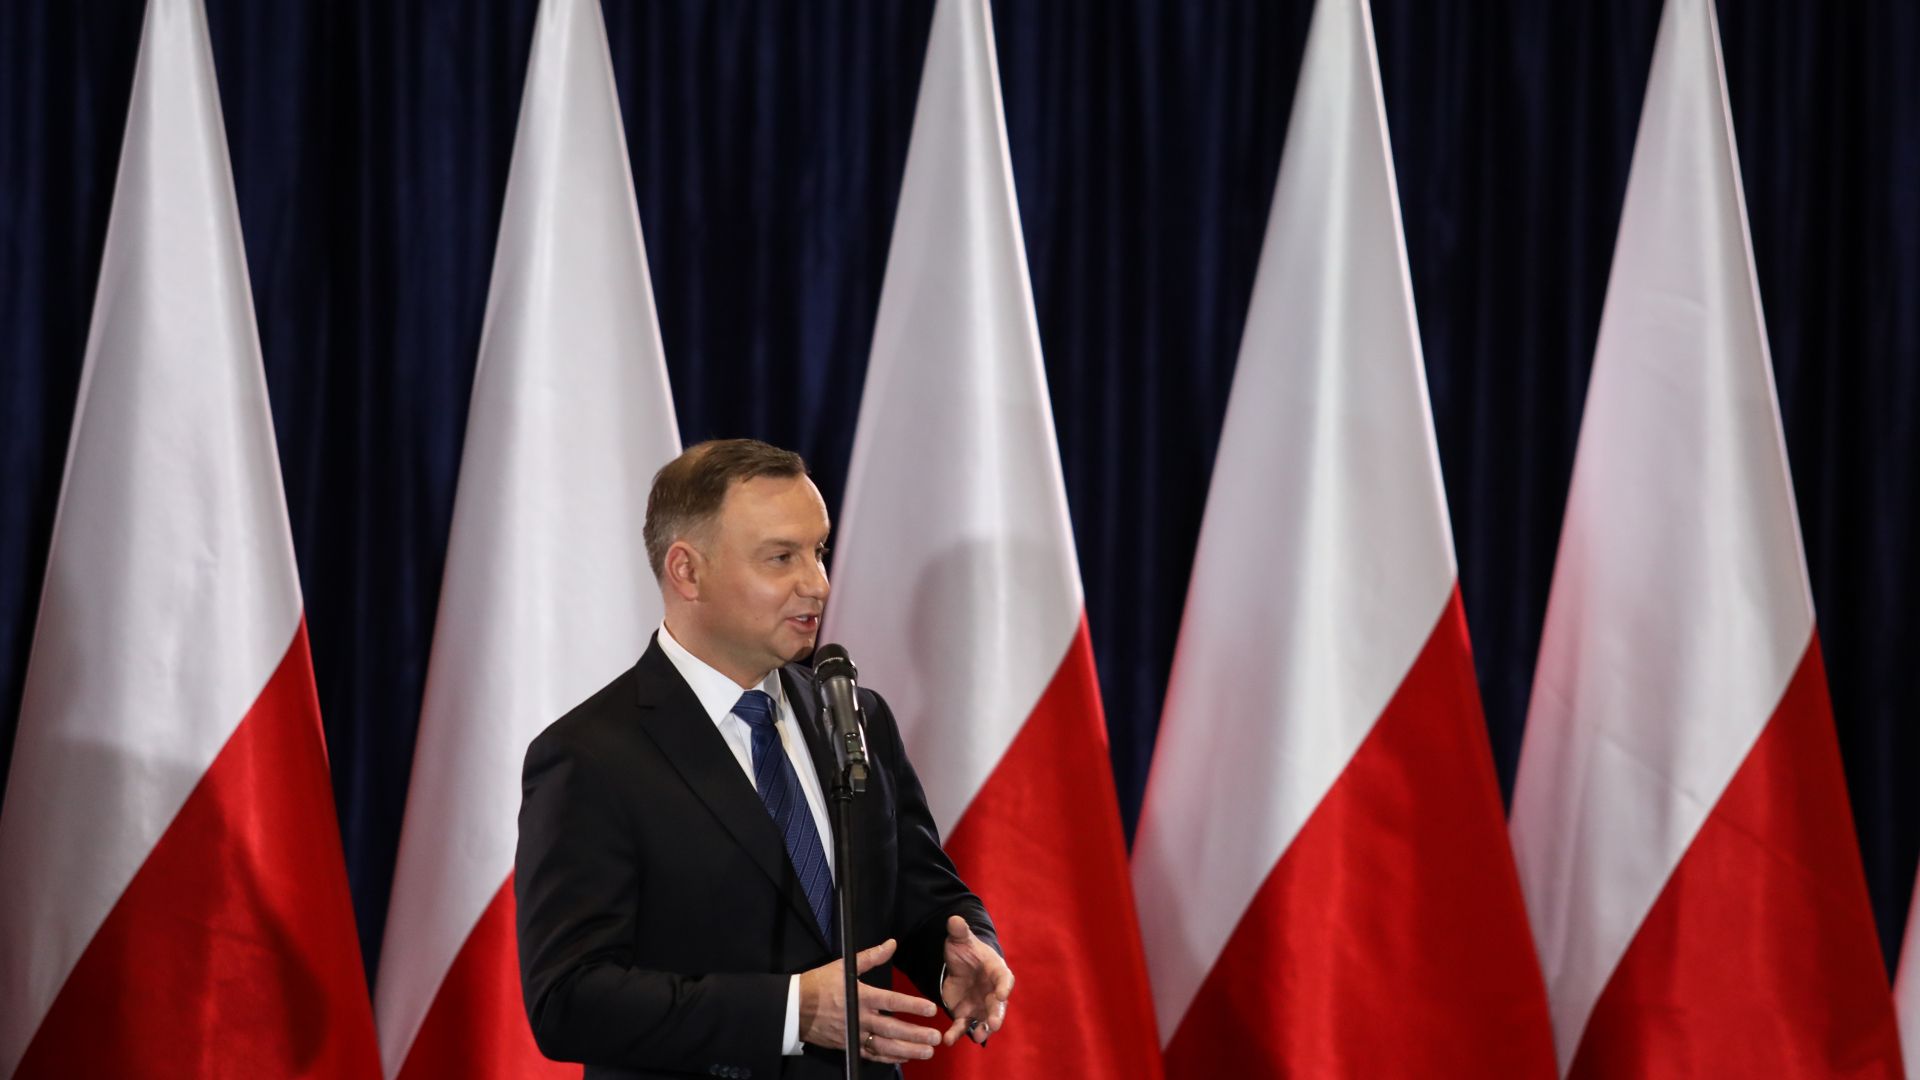 Polish president Andrzej Duda speaking in front of a row of Polish flags